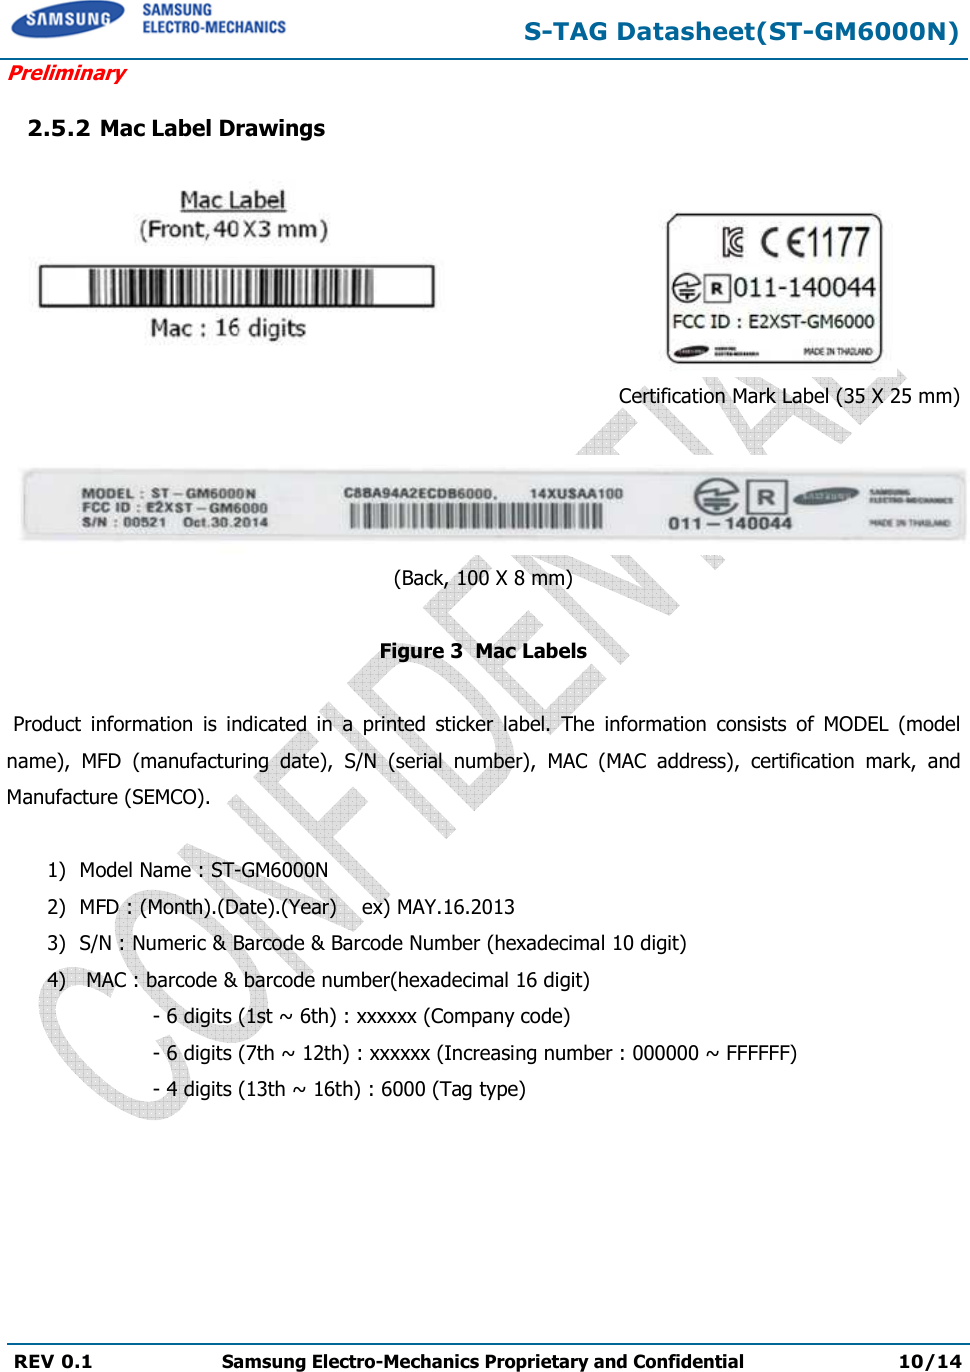  S-TAG Datasheet(ST-GM6000N) Preliminary REV 0.1  Samsung Electro-Mechanics Proprietary and Confidential 10/14   2.5.2 Mac Label Drawings                           Certification Mark Label (35 X 25 mm)   (Back, 100 X 8 mm)  Figure 3  Mac Labels      Product  information  is  indicated  in  a  printed  sticker  label.  The  information  consists  of  MODEL  (model name),  MFD  (manufacturing  date),  S/N  (serial  number),  MAC  (MAC  address),  certification  mark,  and Manufacture (SEMCO).  1) Model Name : ST-GM6000N 2) MFD : (Month).(Date).(Year)    ex) MAY.16.2013 3) S/N : Numeric &amp; Barcode &amp; Barcode Number (hexadecimal 10 digit) 4)  MAC : barcode &amp; barcode number(hexadecimal 16 digit)            - 6 digits (1st ~ 6th) : xxxxxx (Company code)            - 6 digits (7th ~ 12th) : xxxxxx (Increasing number : 000000 ~ FFFFFF)                  - 4 digits (13th ~ 16th) : 6000 (Tag type) 